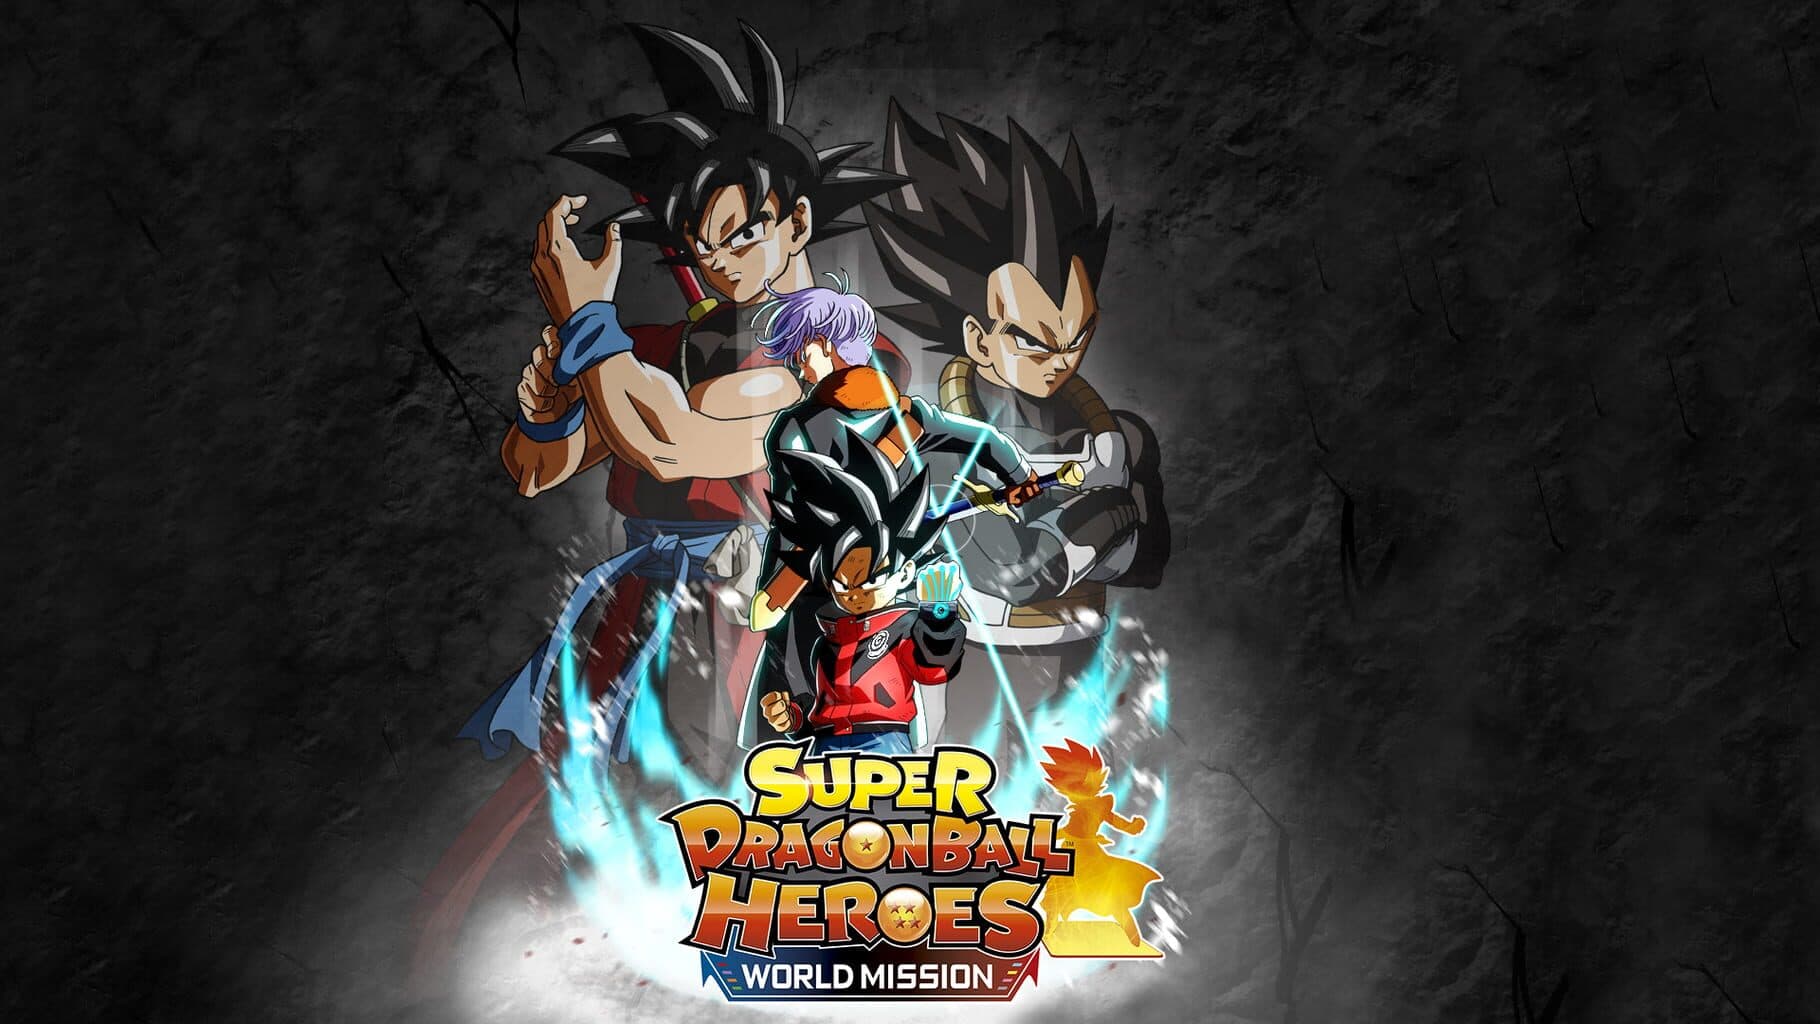 Super Dragon Ball Heroes: World Mission Image